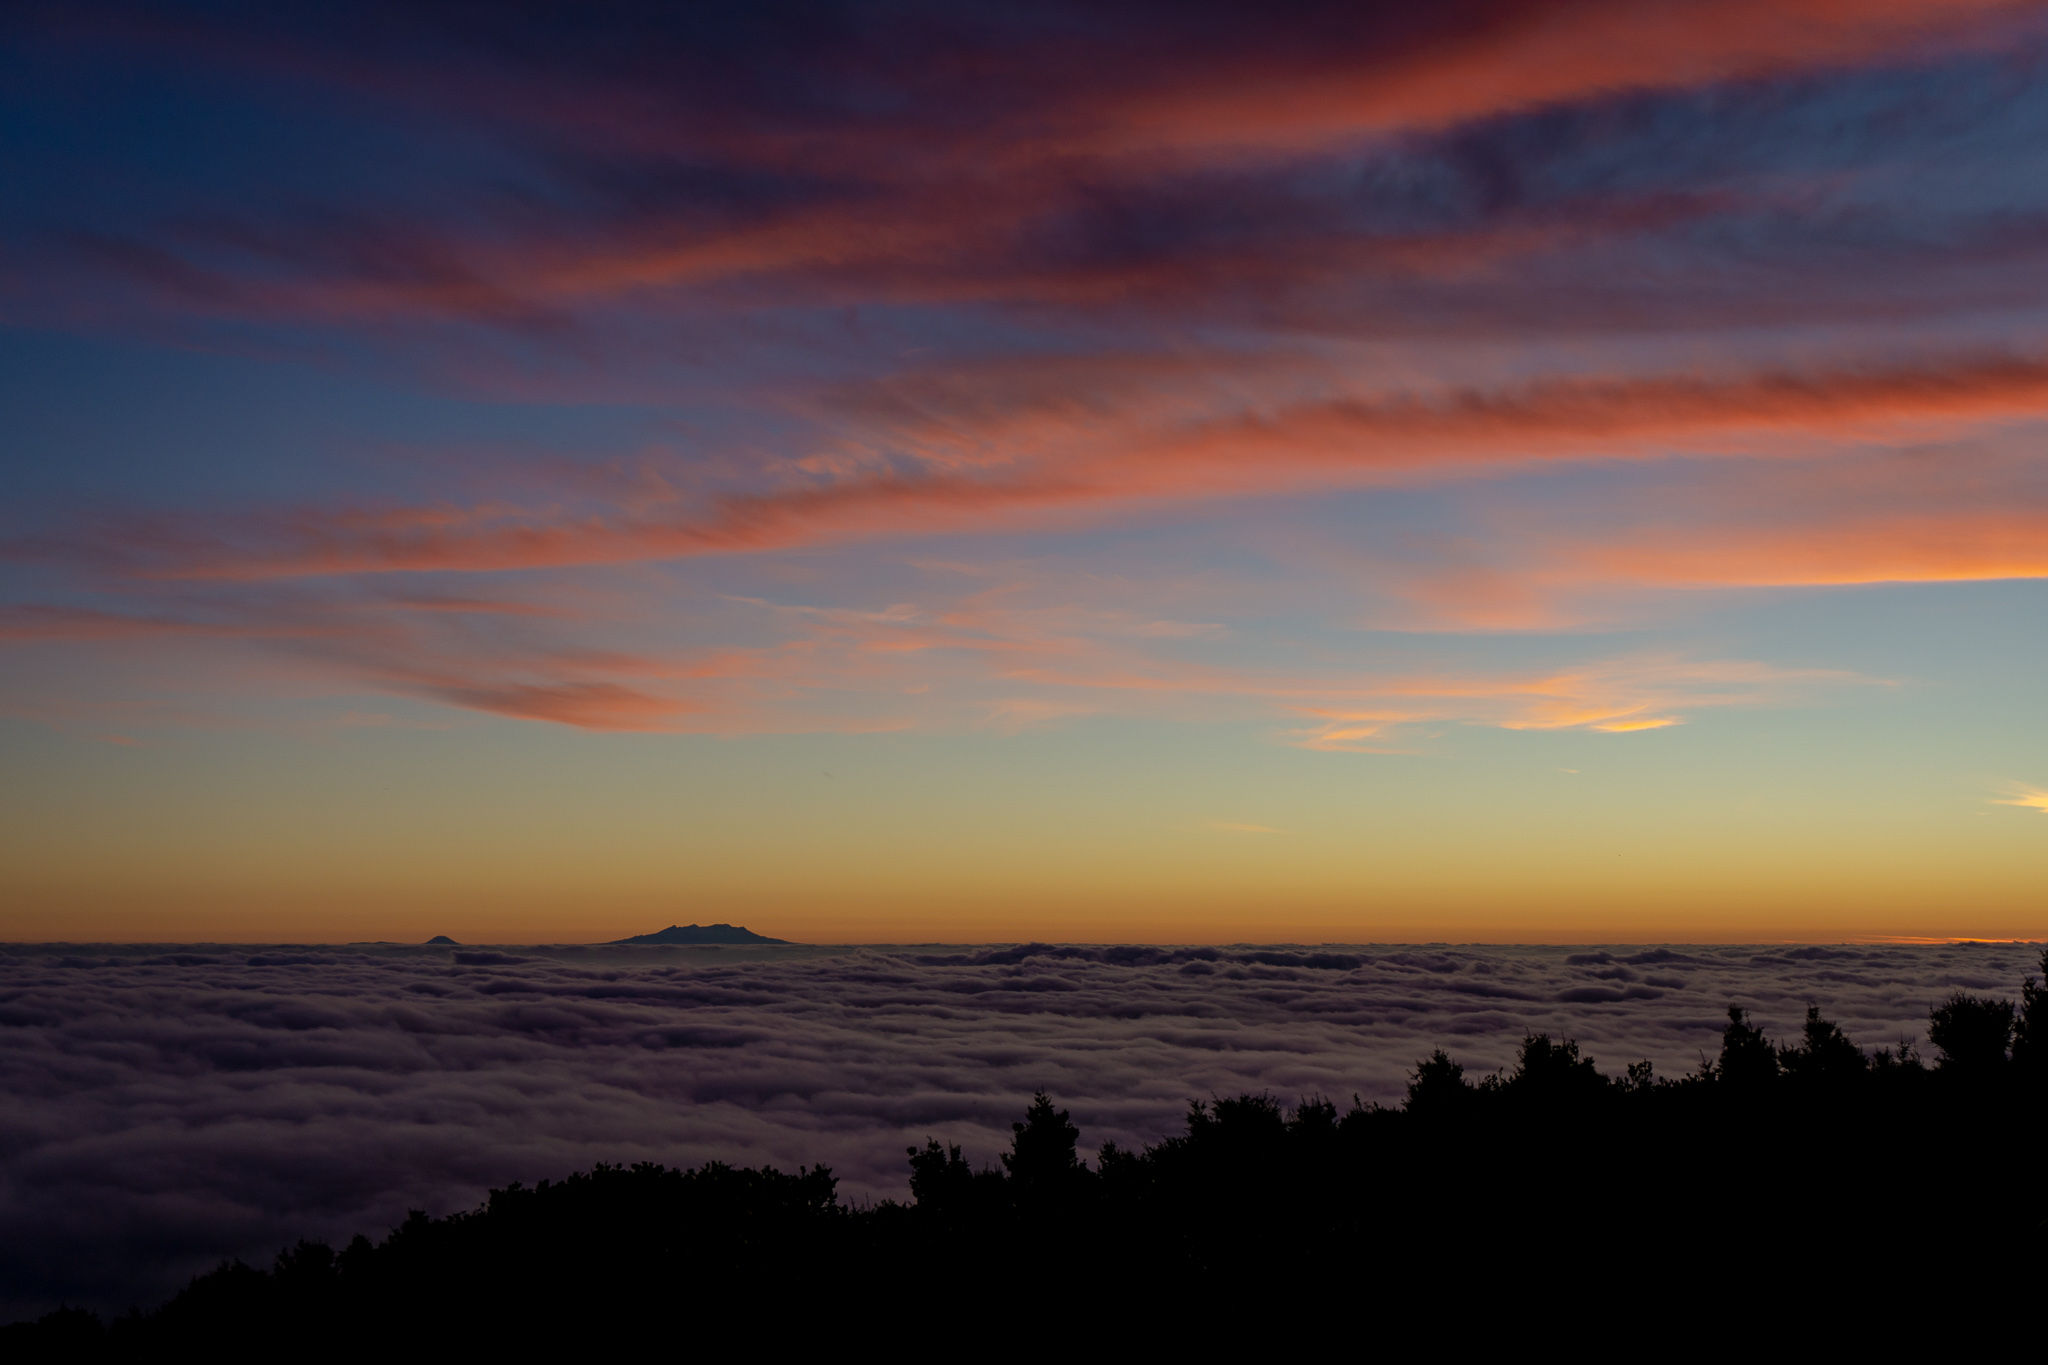 Ruapehu and Ngaurohoe peaking out from an inversion layer of clouds at sunrise